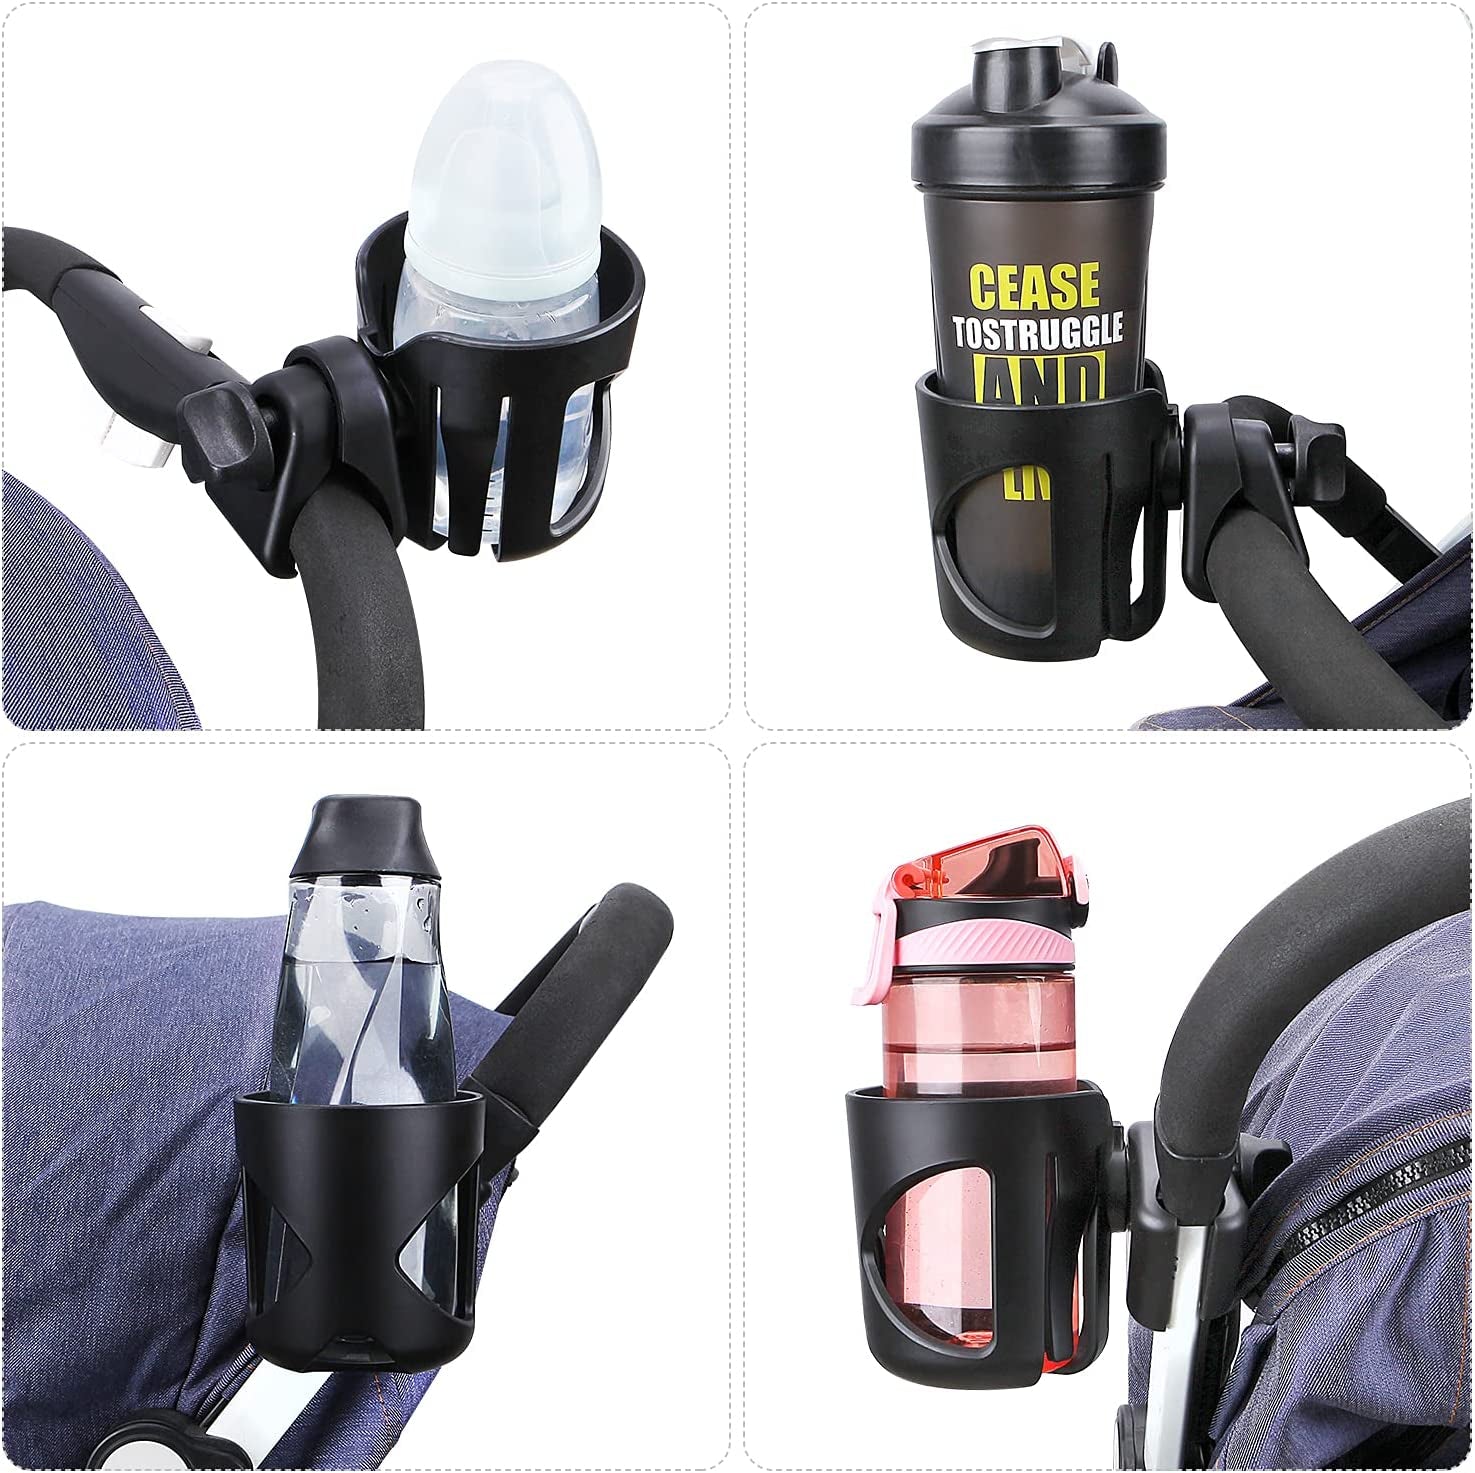 Stroller Cup Holder, Universal Drink Holder for Bikes, Trolleys or Walkers, Fits Most Cups